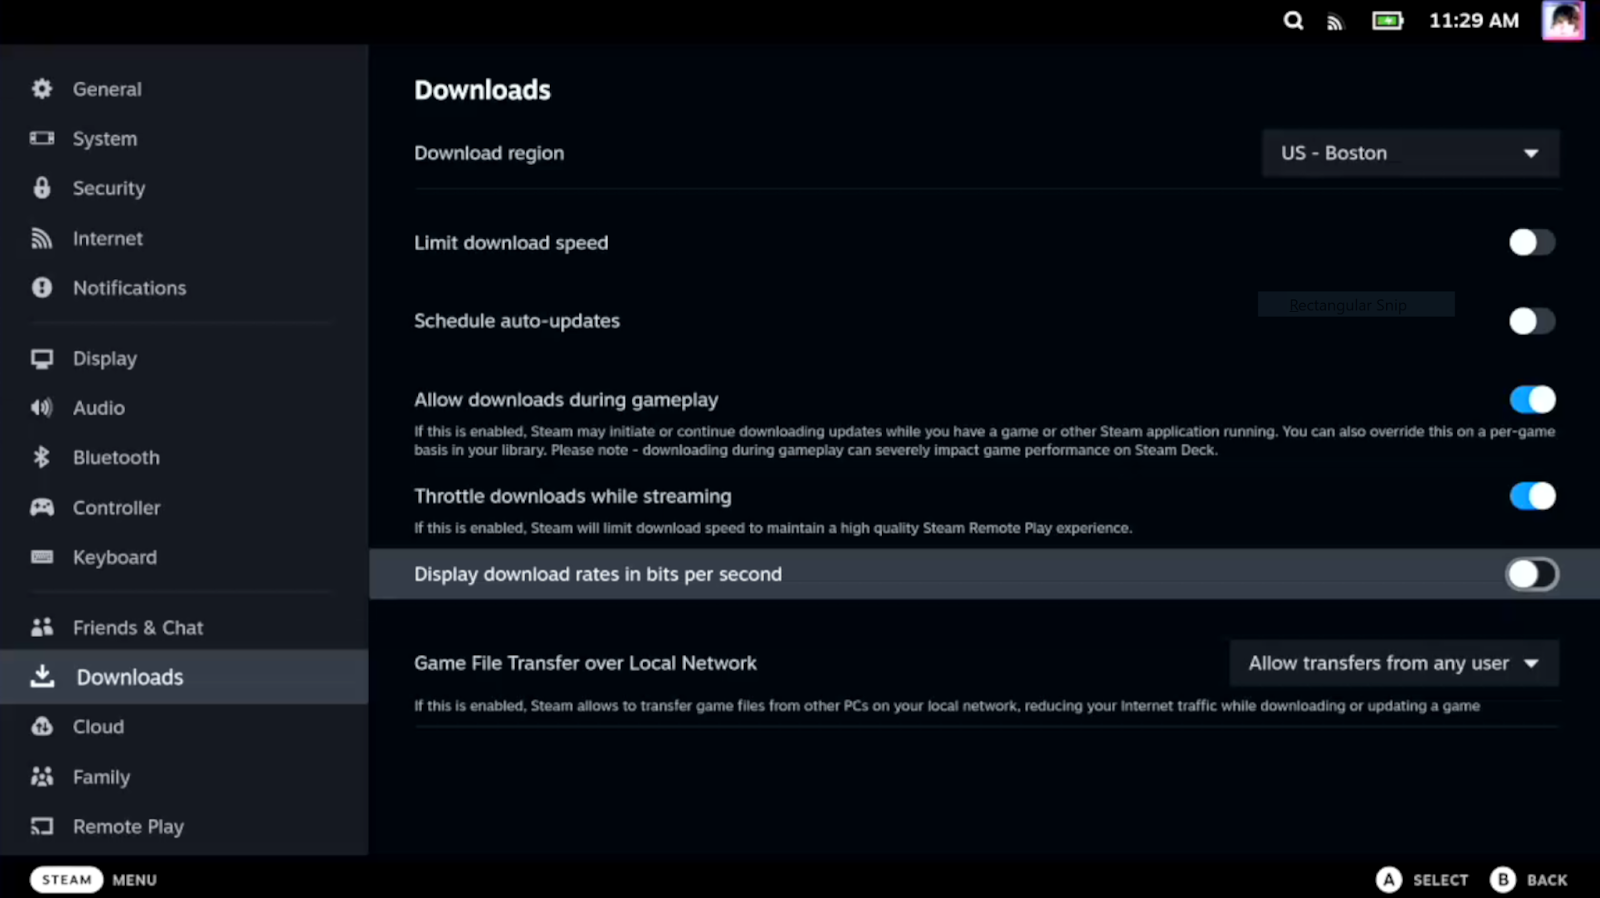 If this is enabled, Steam allows to transfer game files from other PCs on your local network, reducing your Internet traffic while downloading or updating a game